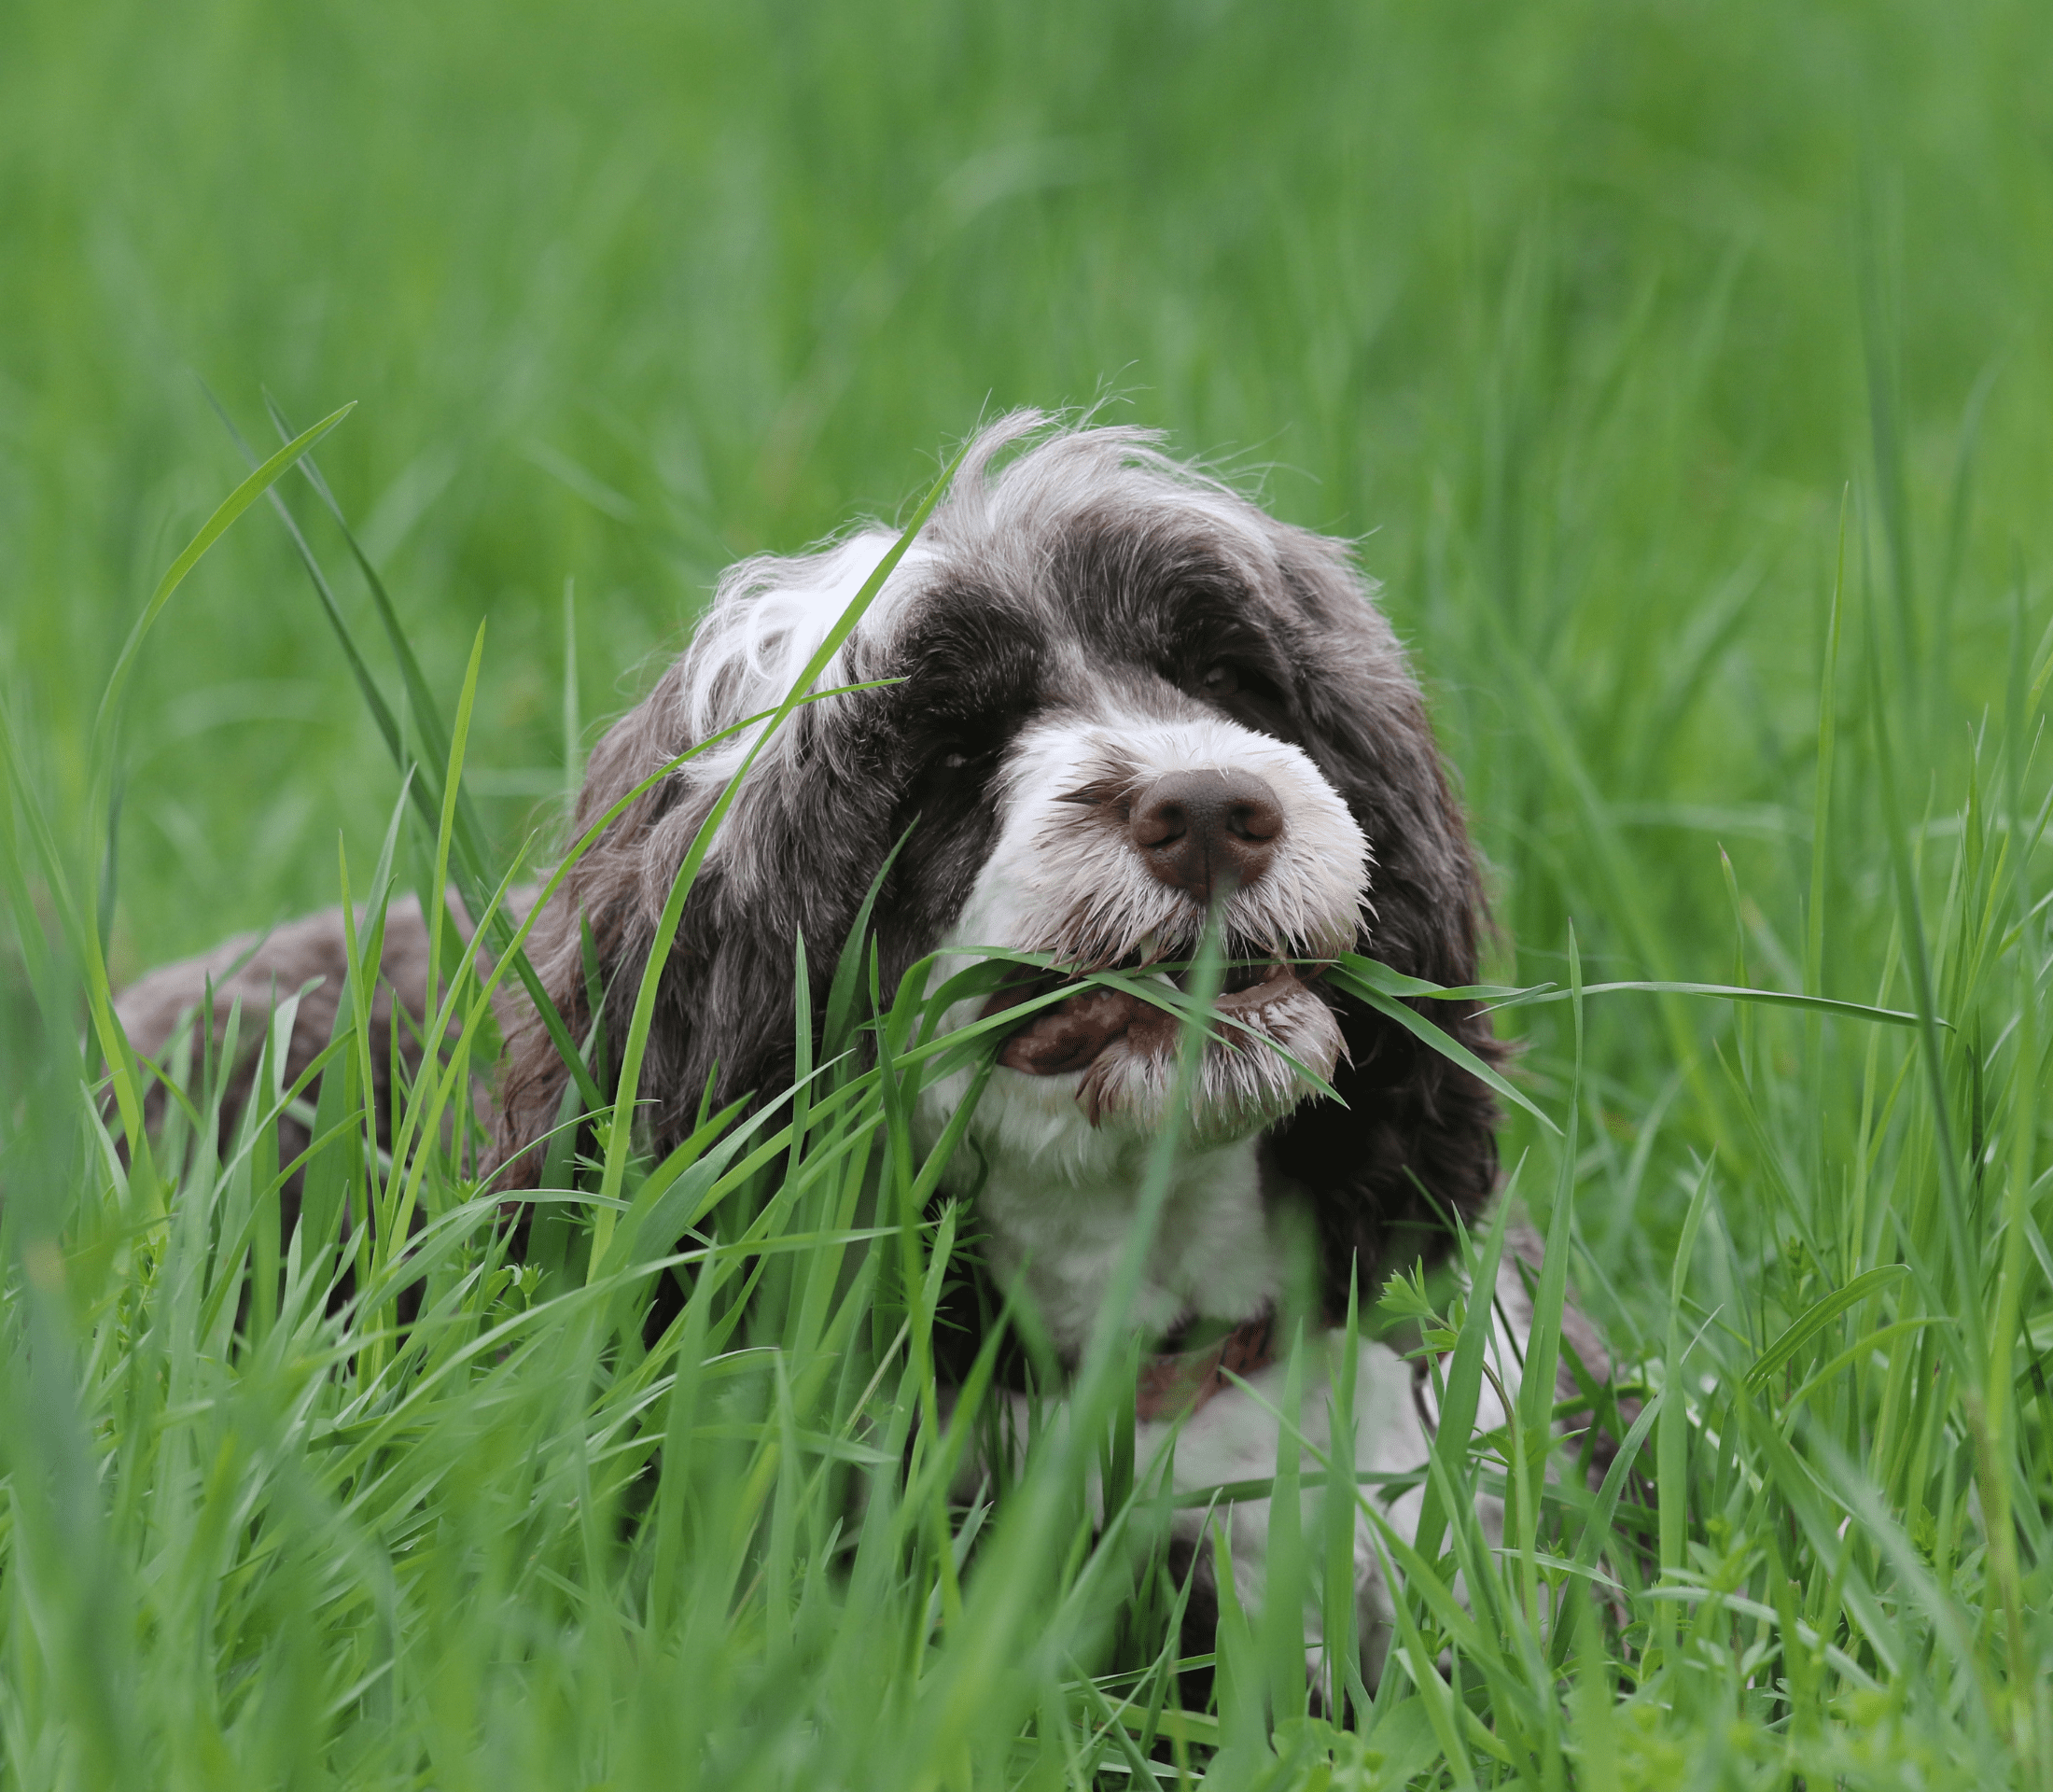 Hairy gray dog nipping on grass